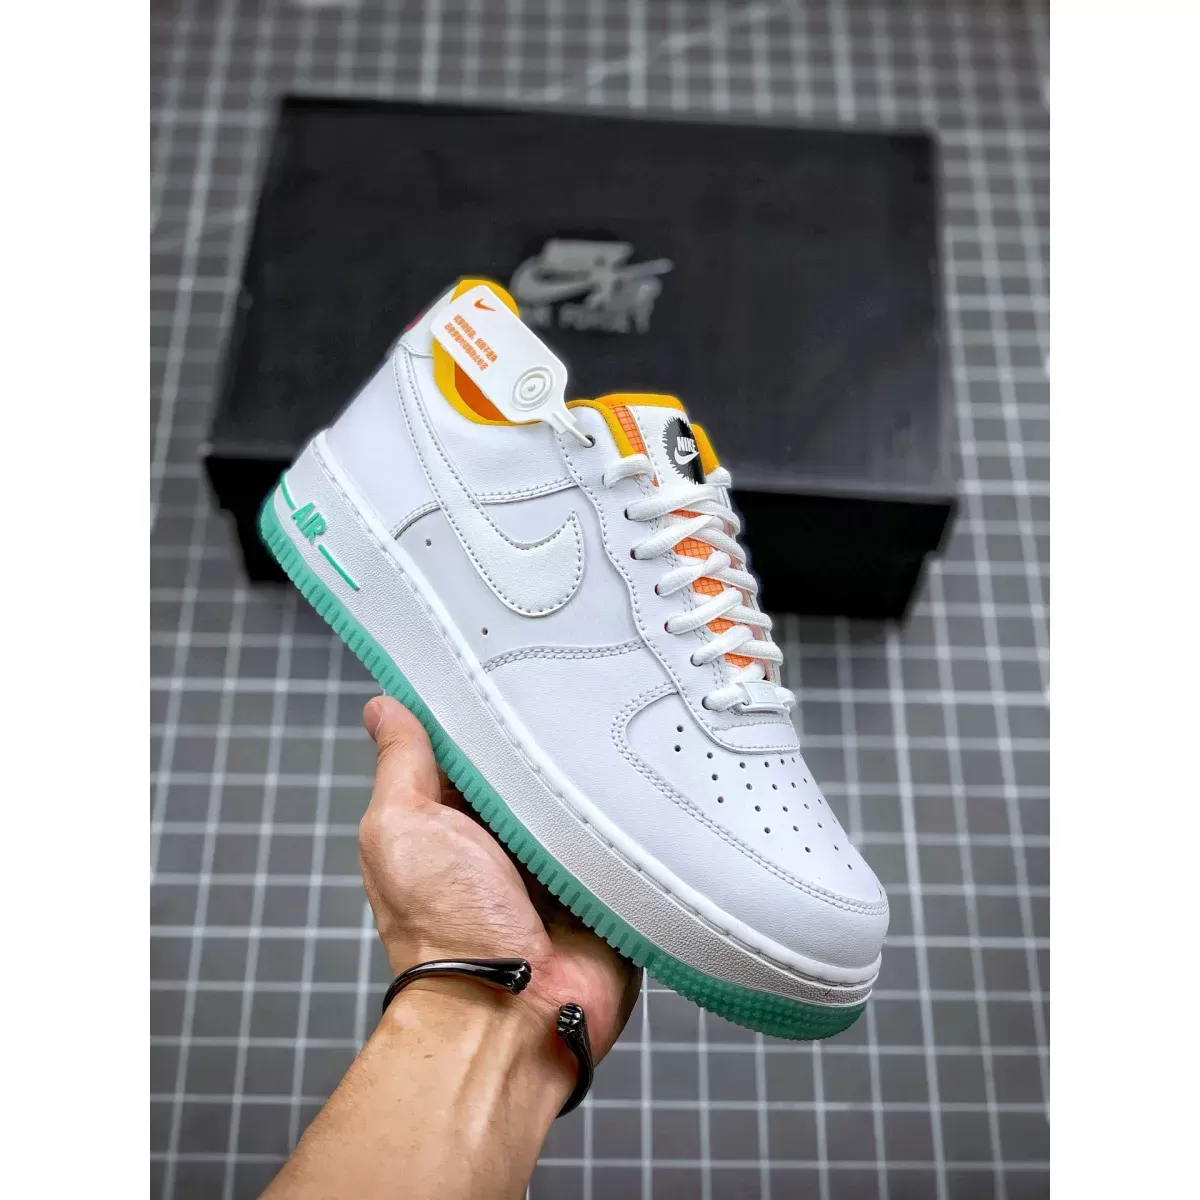 Nike Air Force 1 Low White/Dark Sulfur/Hyper Pink/White CZ8132-100 clear air force 1